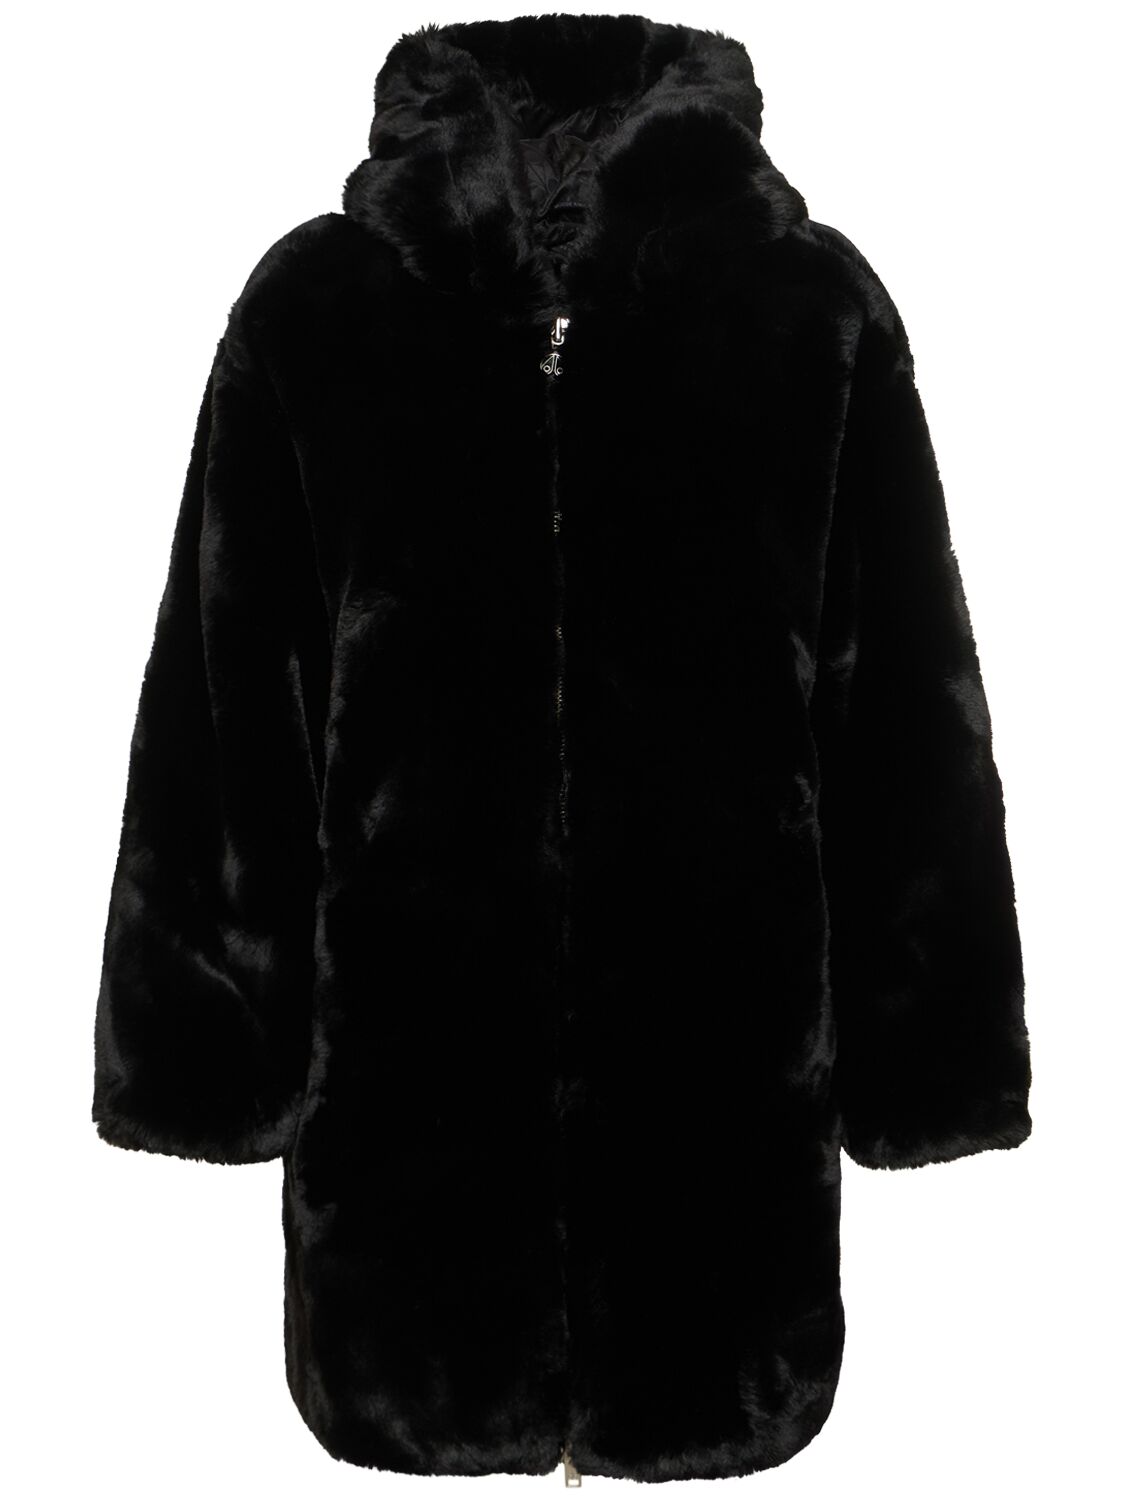 MOOSE KNUCKLES STATE BUNNY FAUX FUR HOODED LONG JACKET